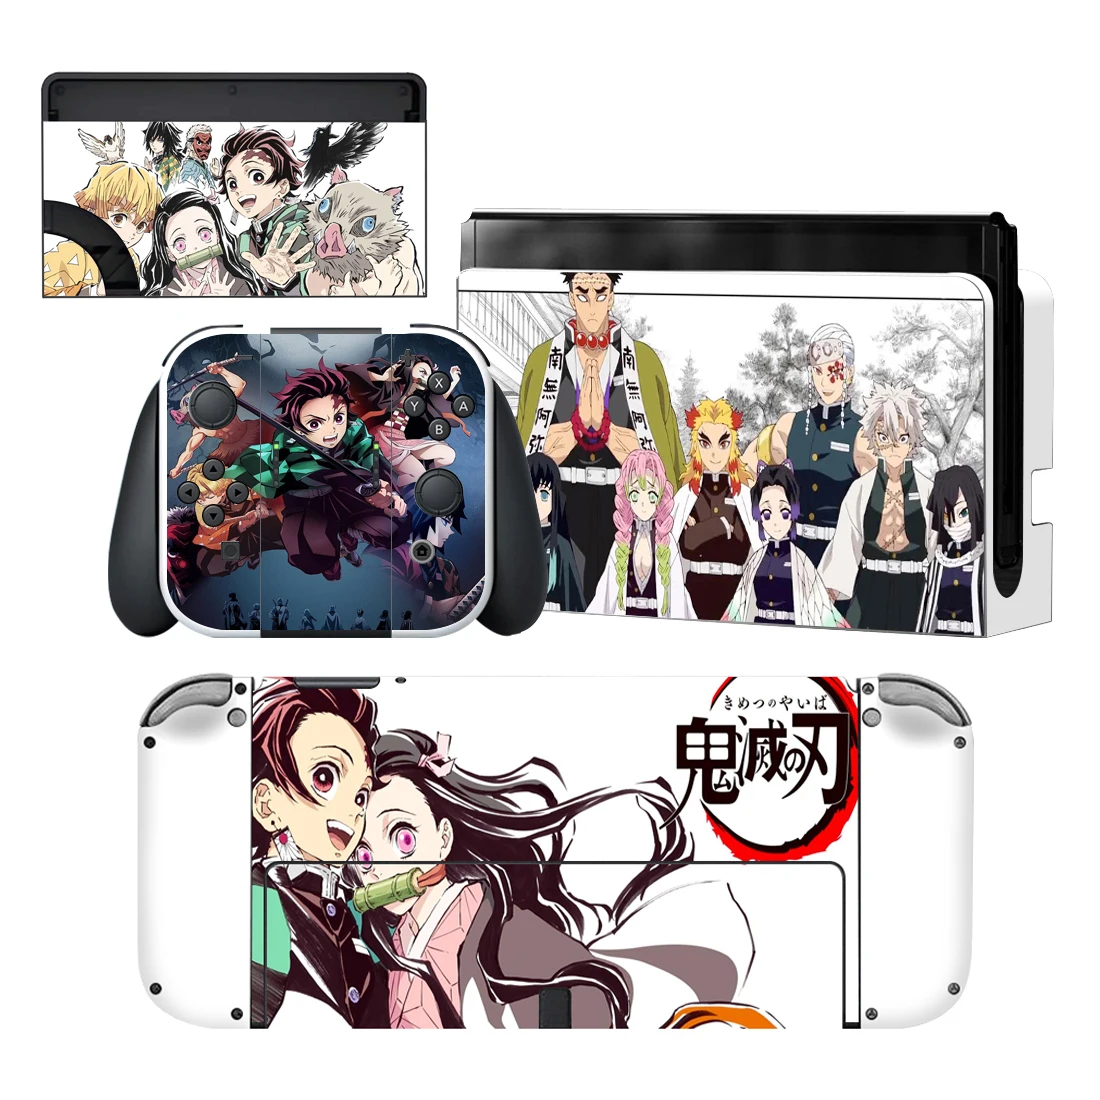 Demon Slayer NintendoNintendoswitch Skin Cover Sticker Decal for Nintendo Switch OLED Console Joy-con Controller Dock Skin Vinyl